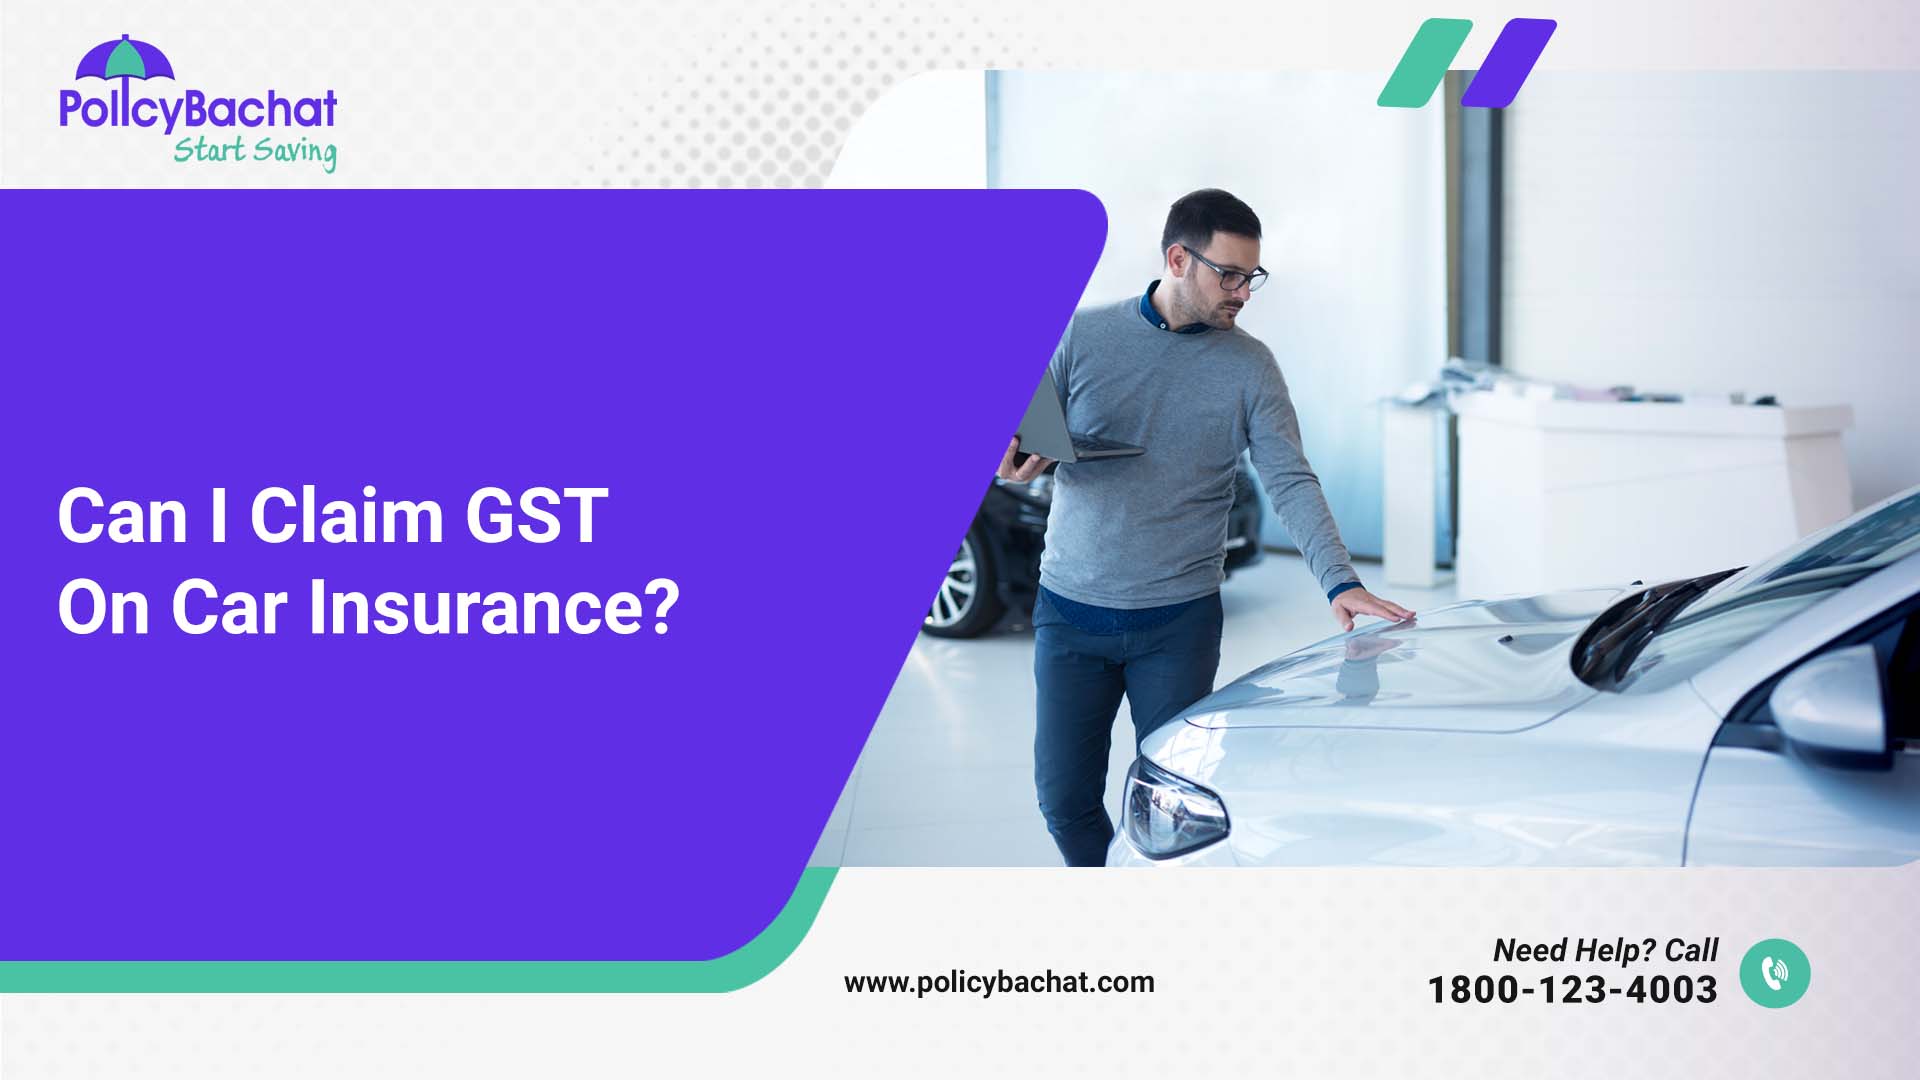 can-i-claim-gst-on-car-insurance-policybachat